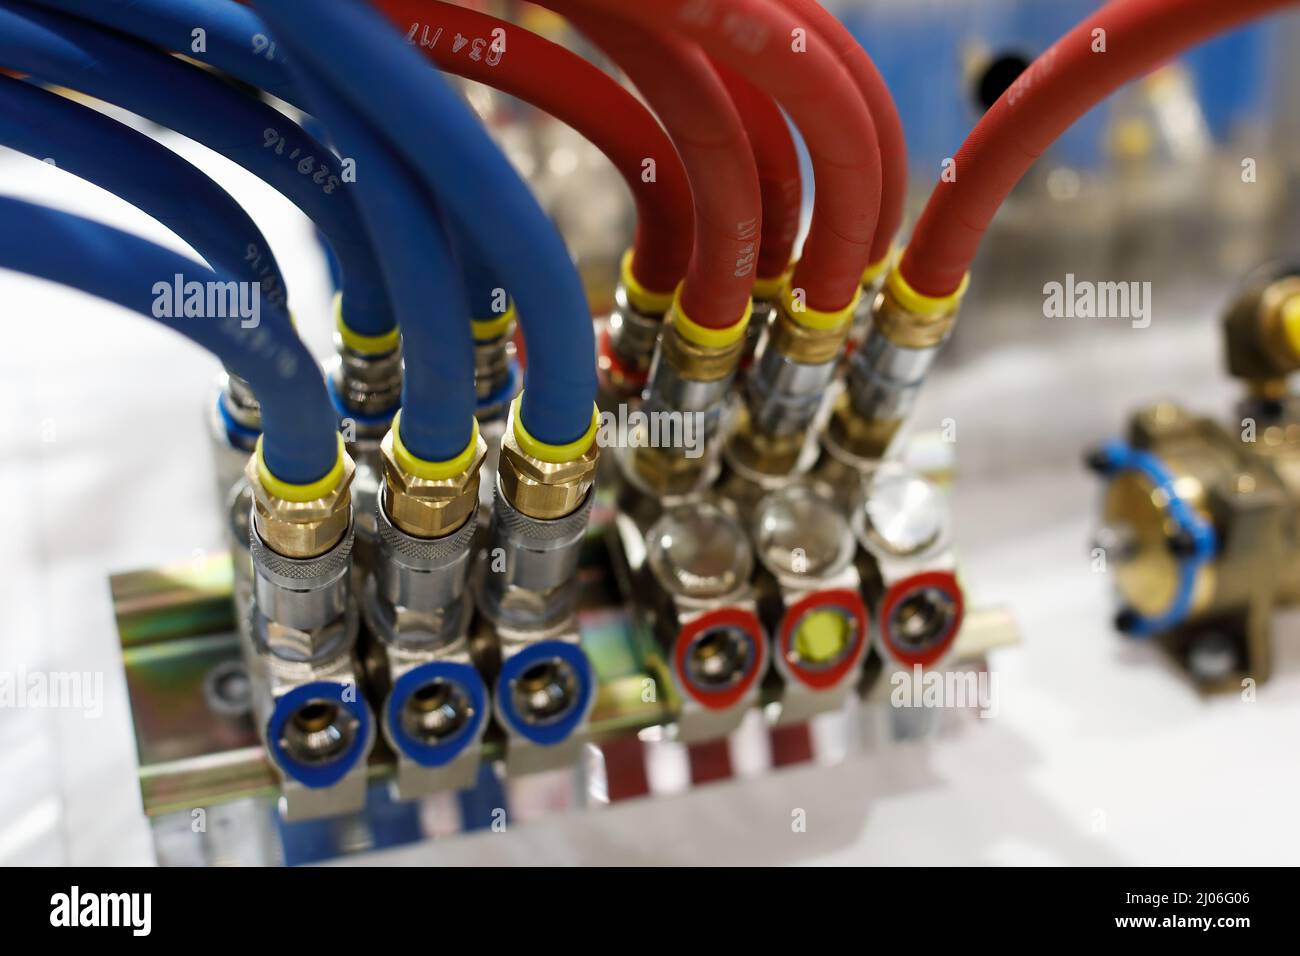 Reinforced rubber air hoses with pneumatic fittings. Selective focus. Stock Photo